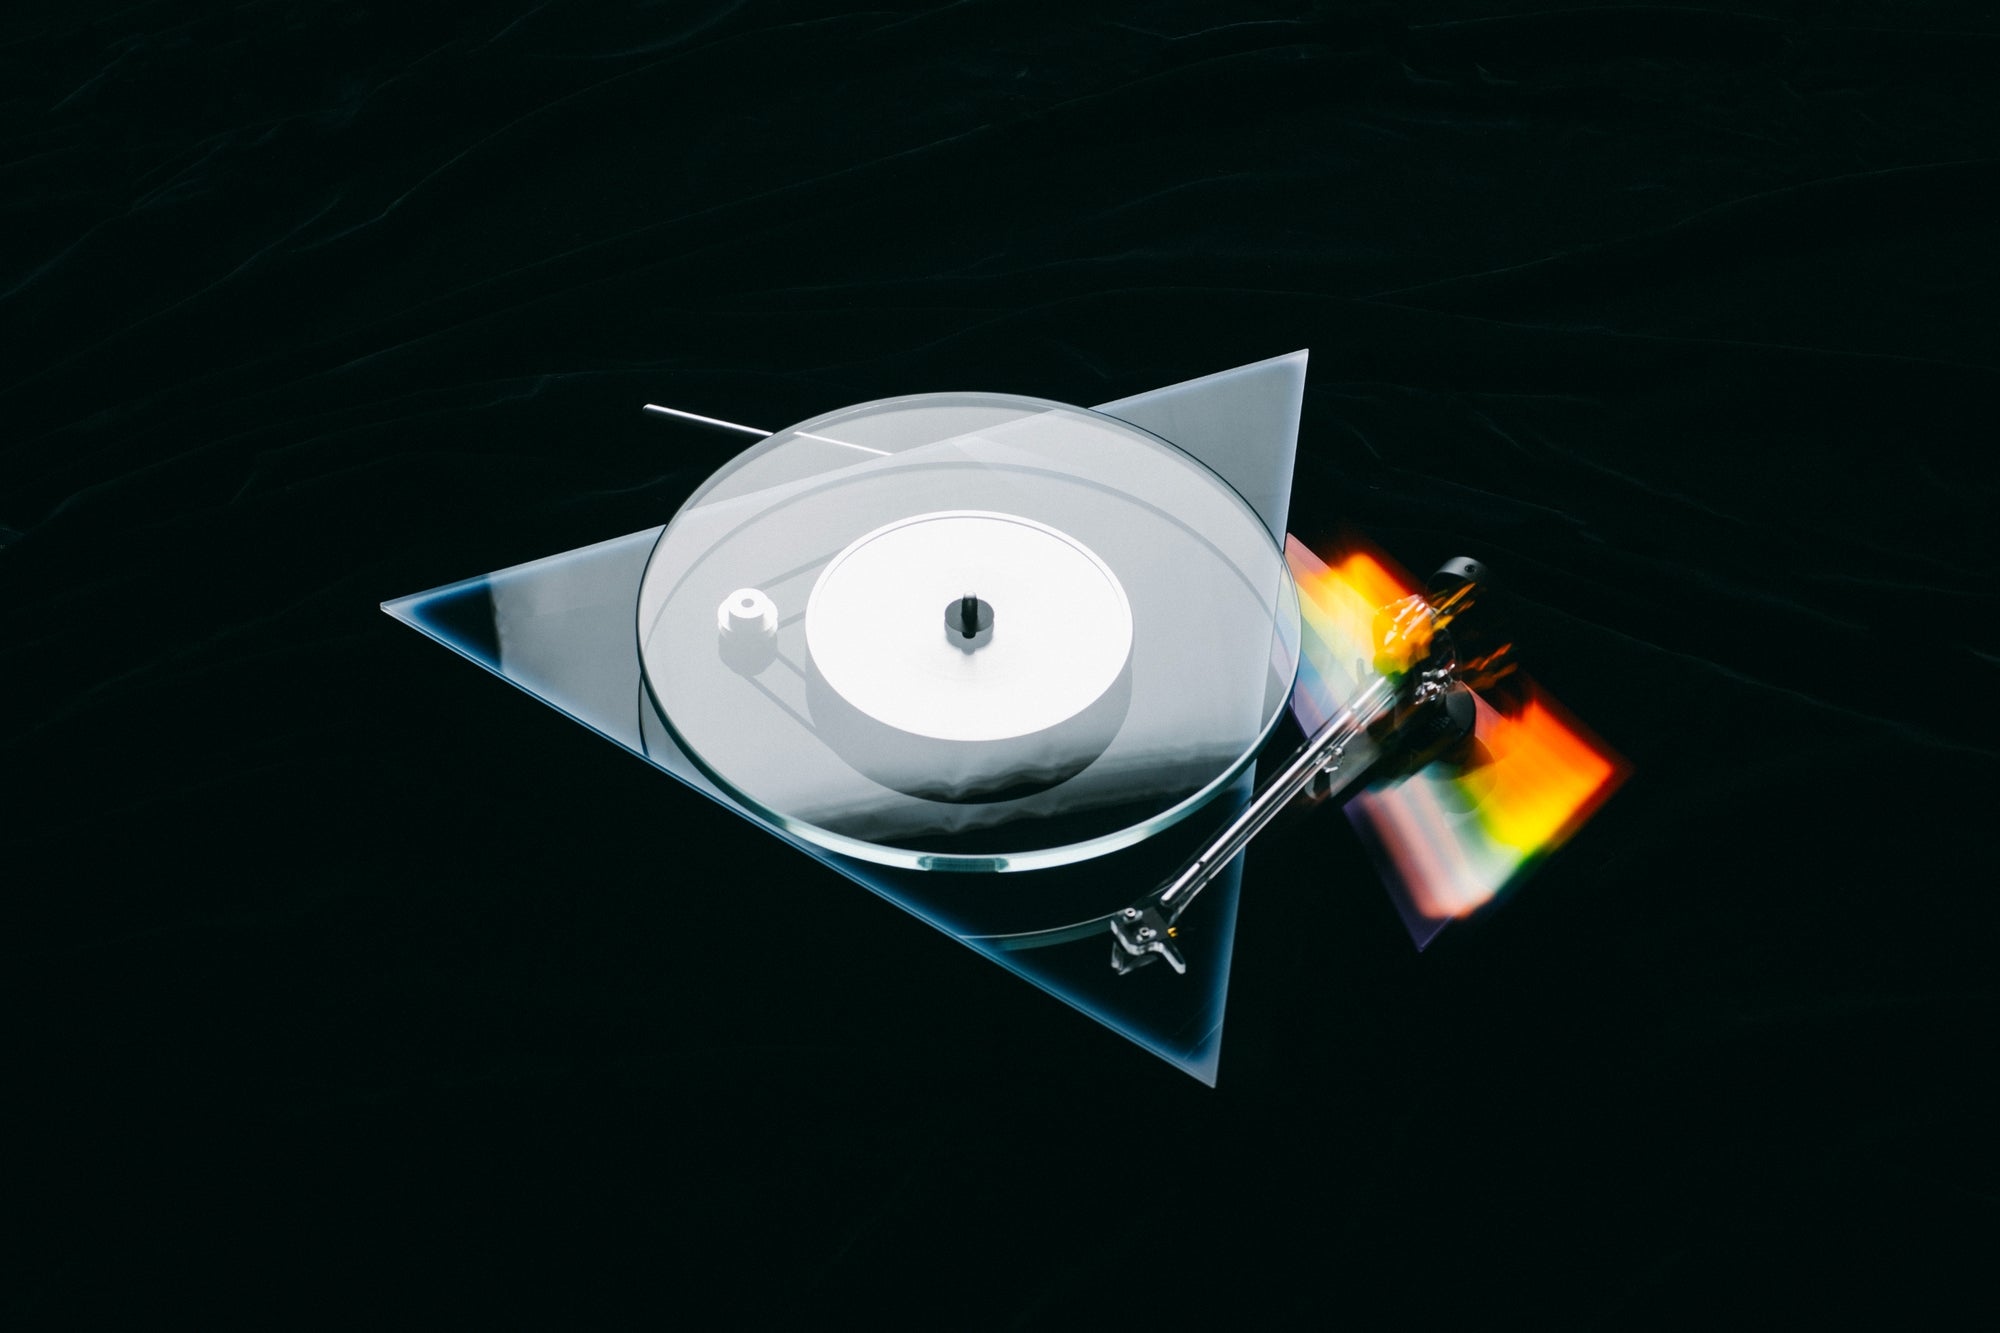 PRO-JECT DARK SIDE OF THE MOON TURNTABLE WITH PICK IT PRO CARTRIDGE - SPECIAL ORDER ONLY